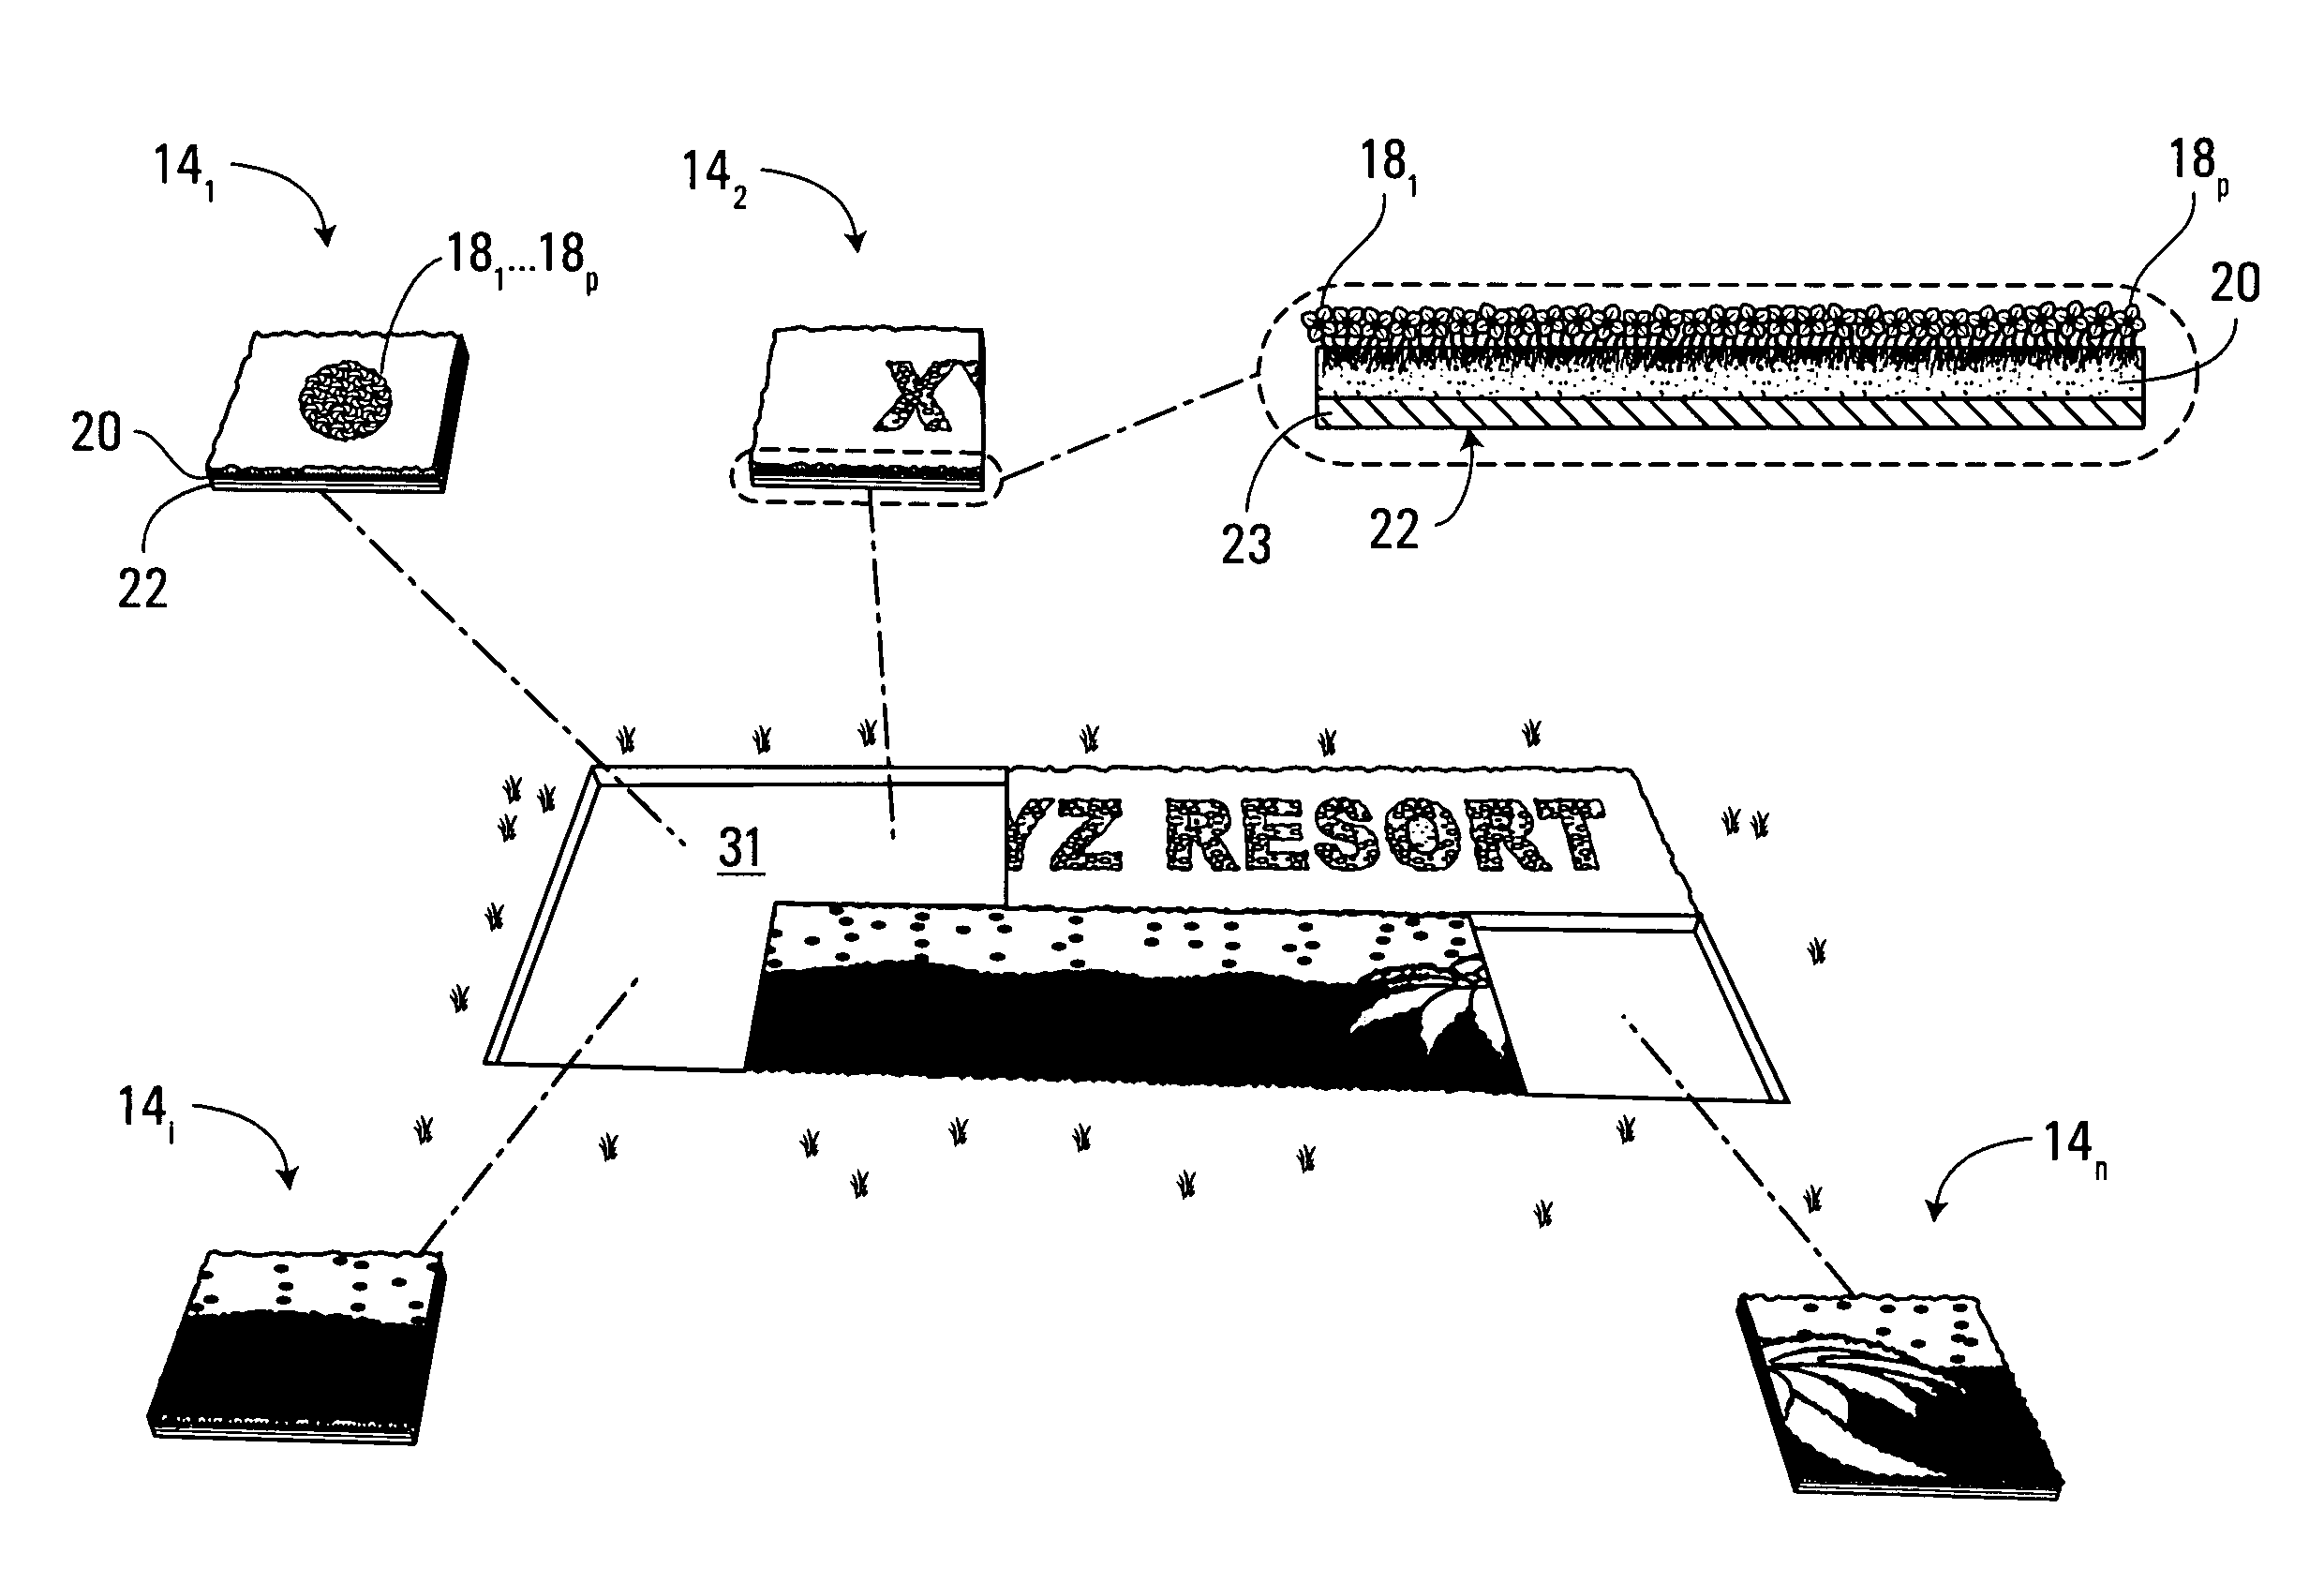 Floral arrangement rendering an image and applications thereof